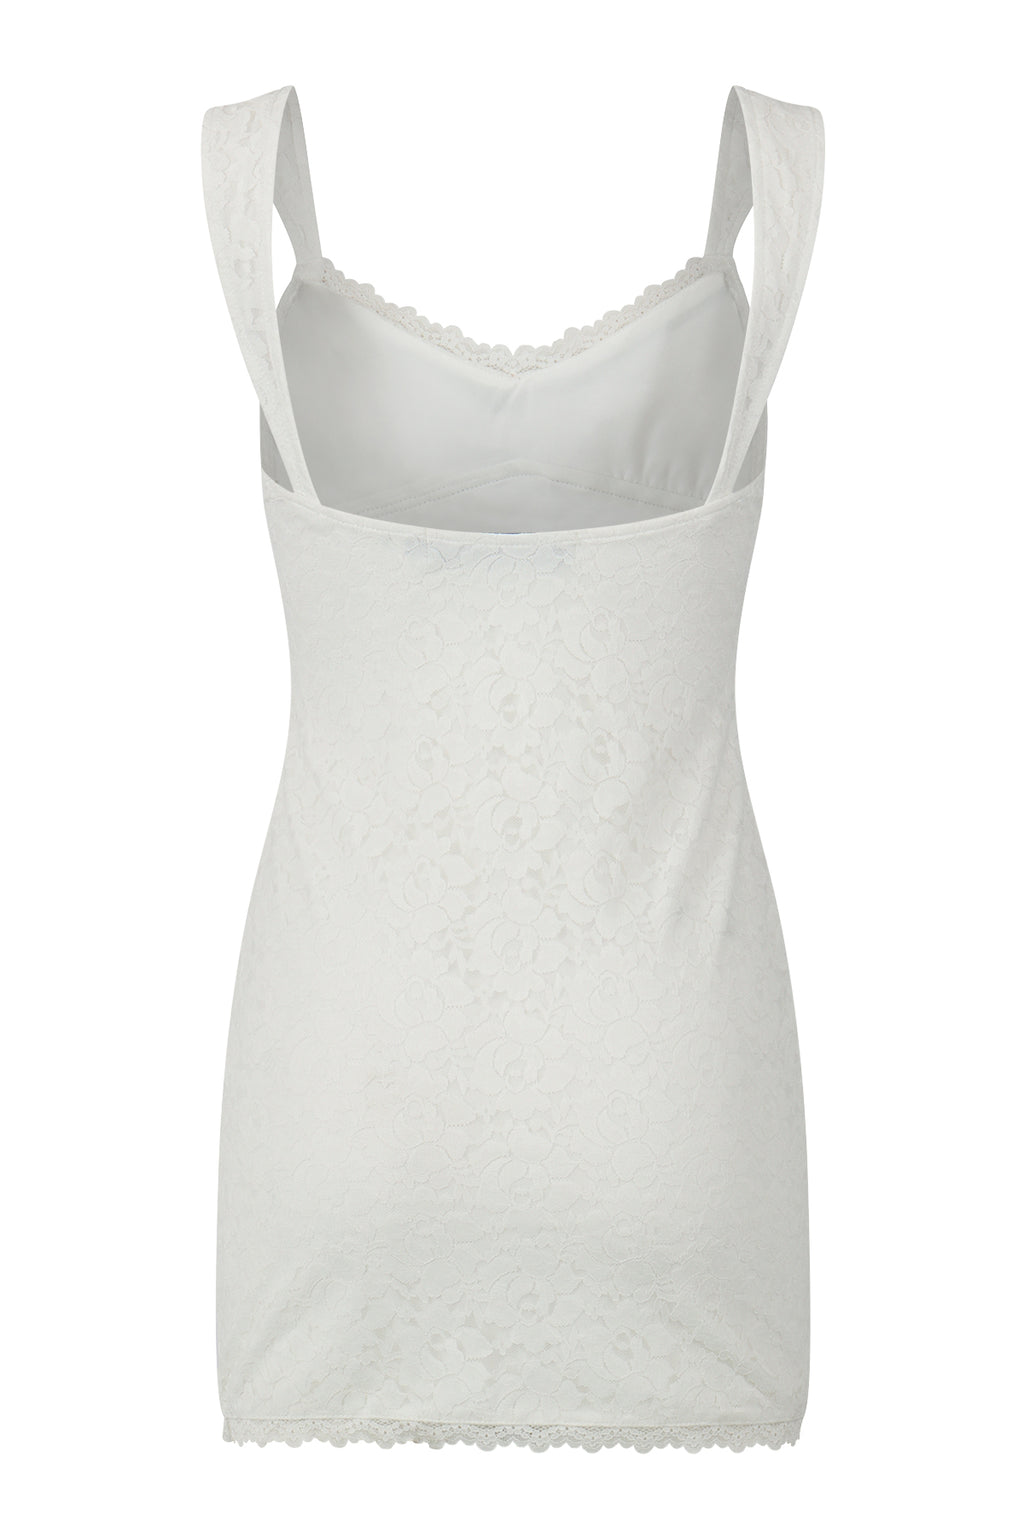 Real Love White Lace with Contrast Trim Mini Dress